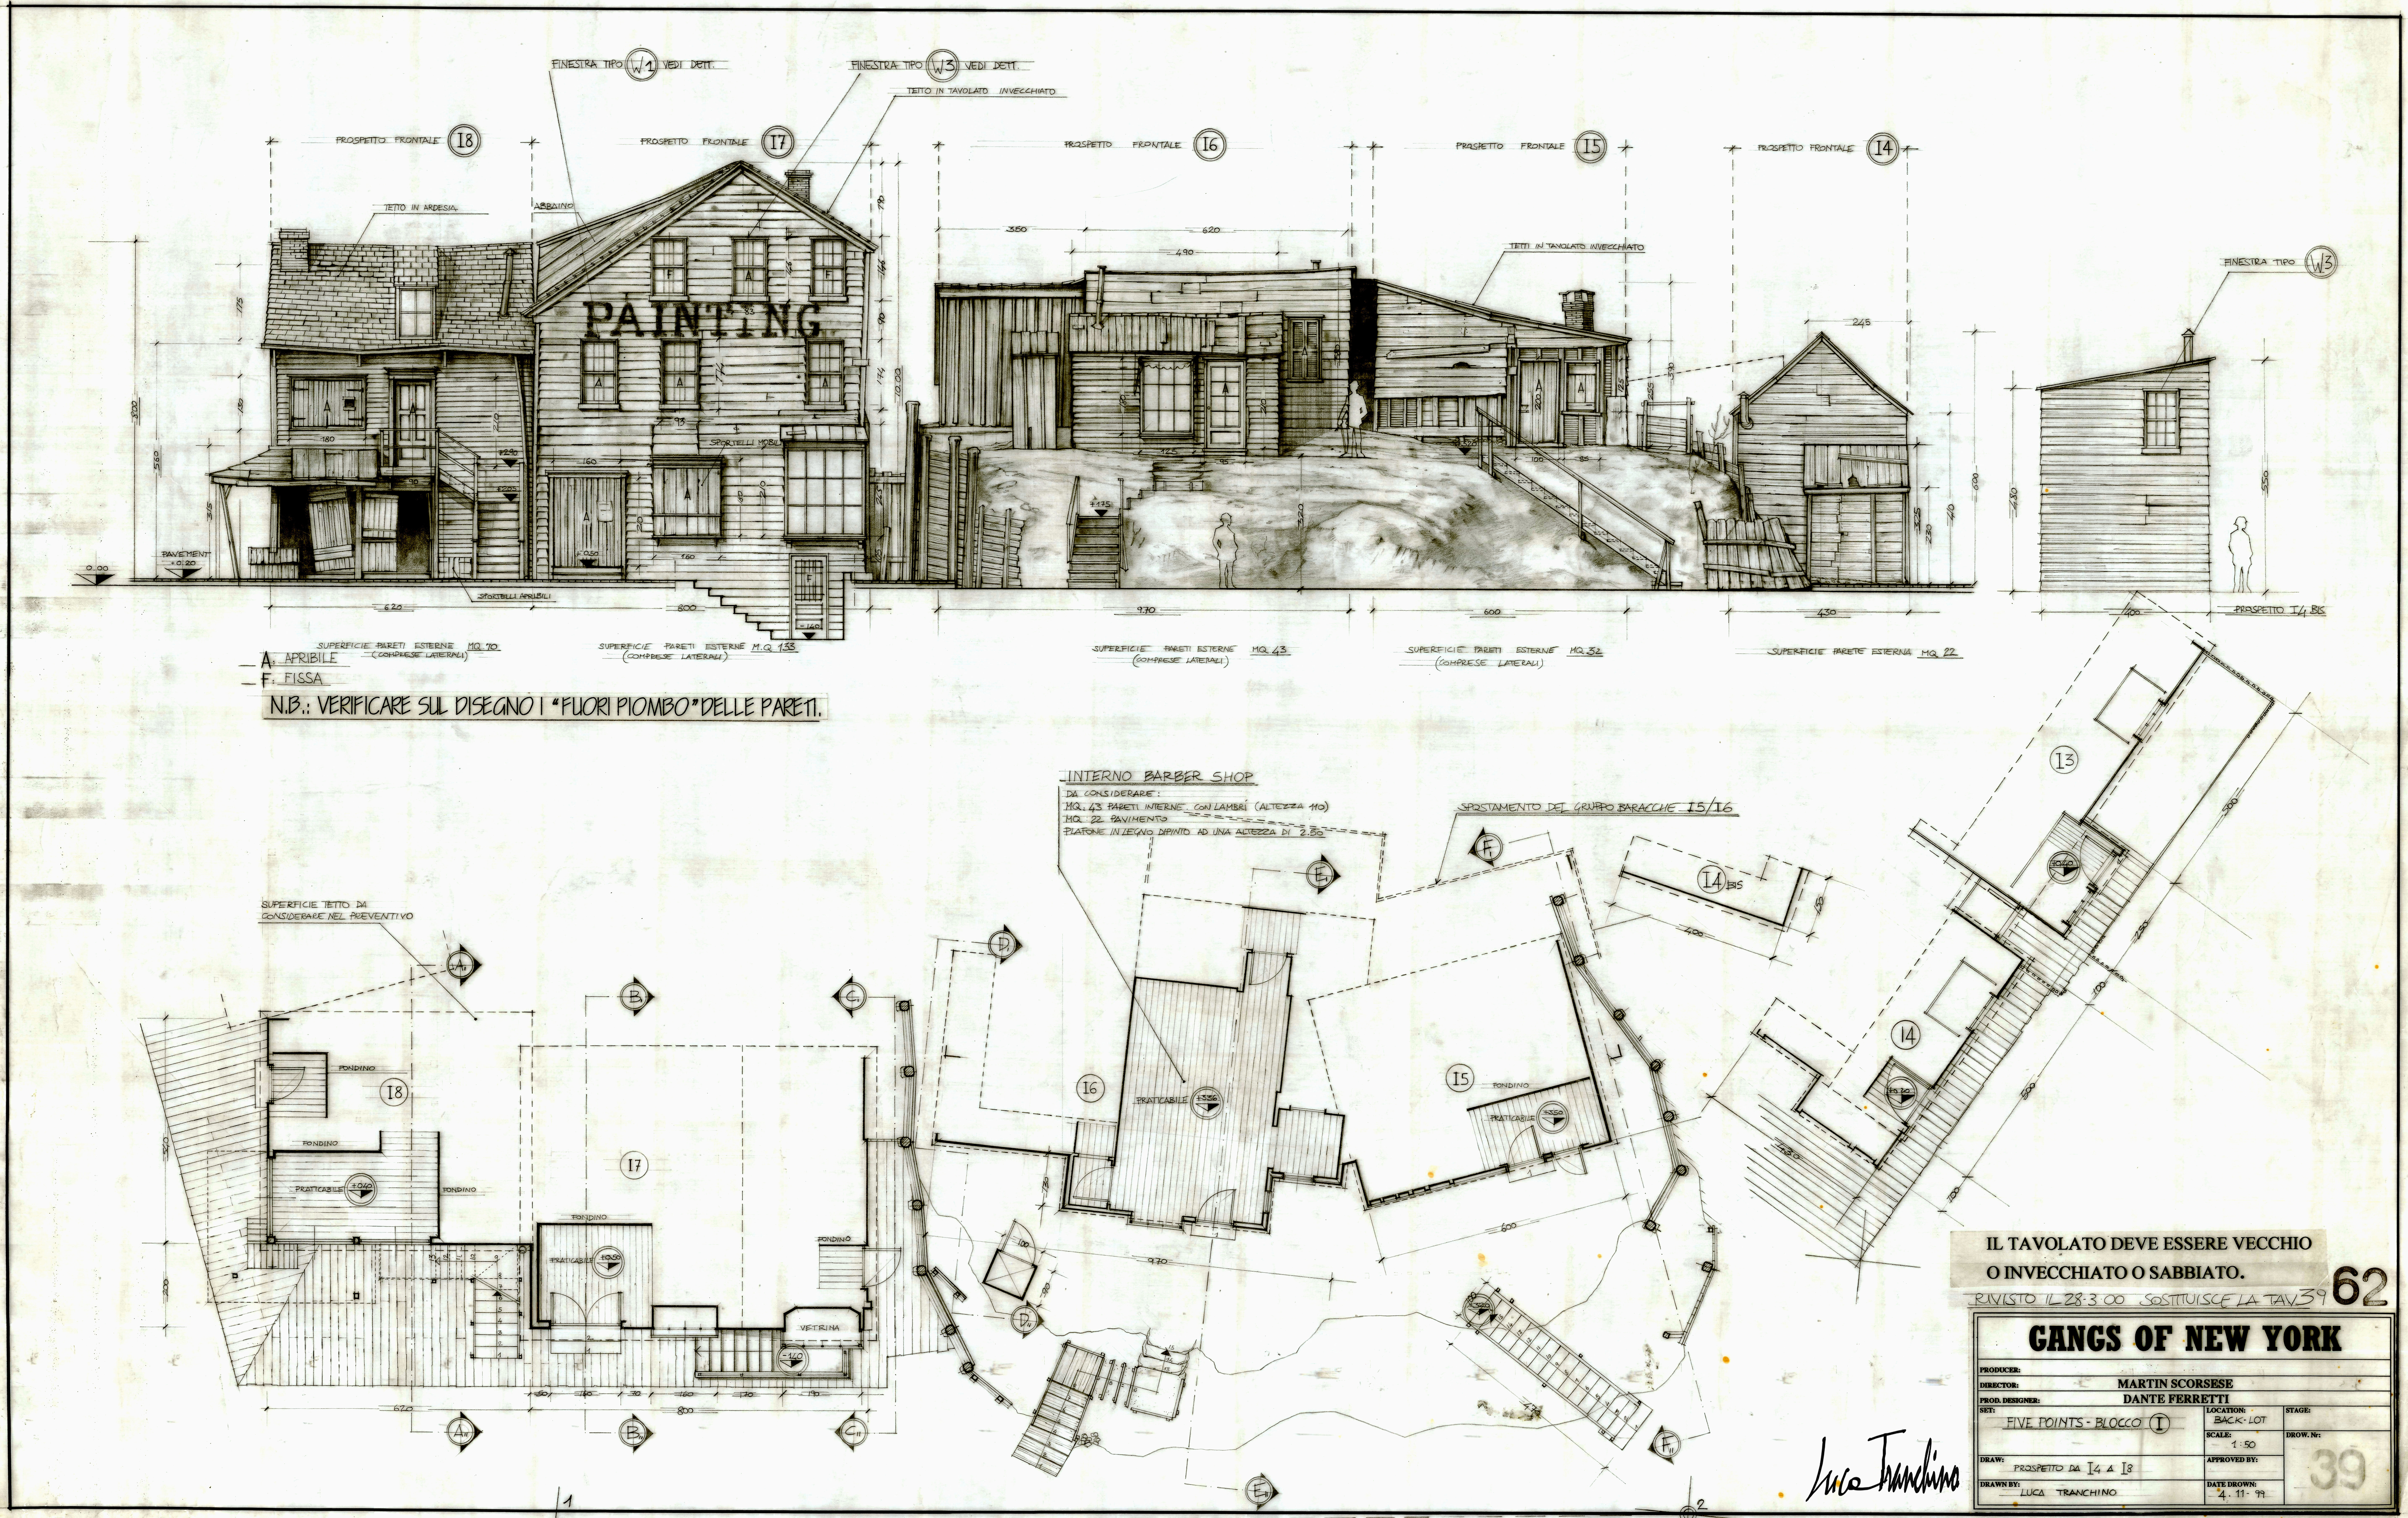 Gangs of New York - Directed by Martin Scorsese - Five Points - Technical Drawing by Luca Tranchino - ©2002 - Miramax Films